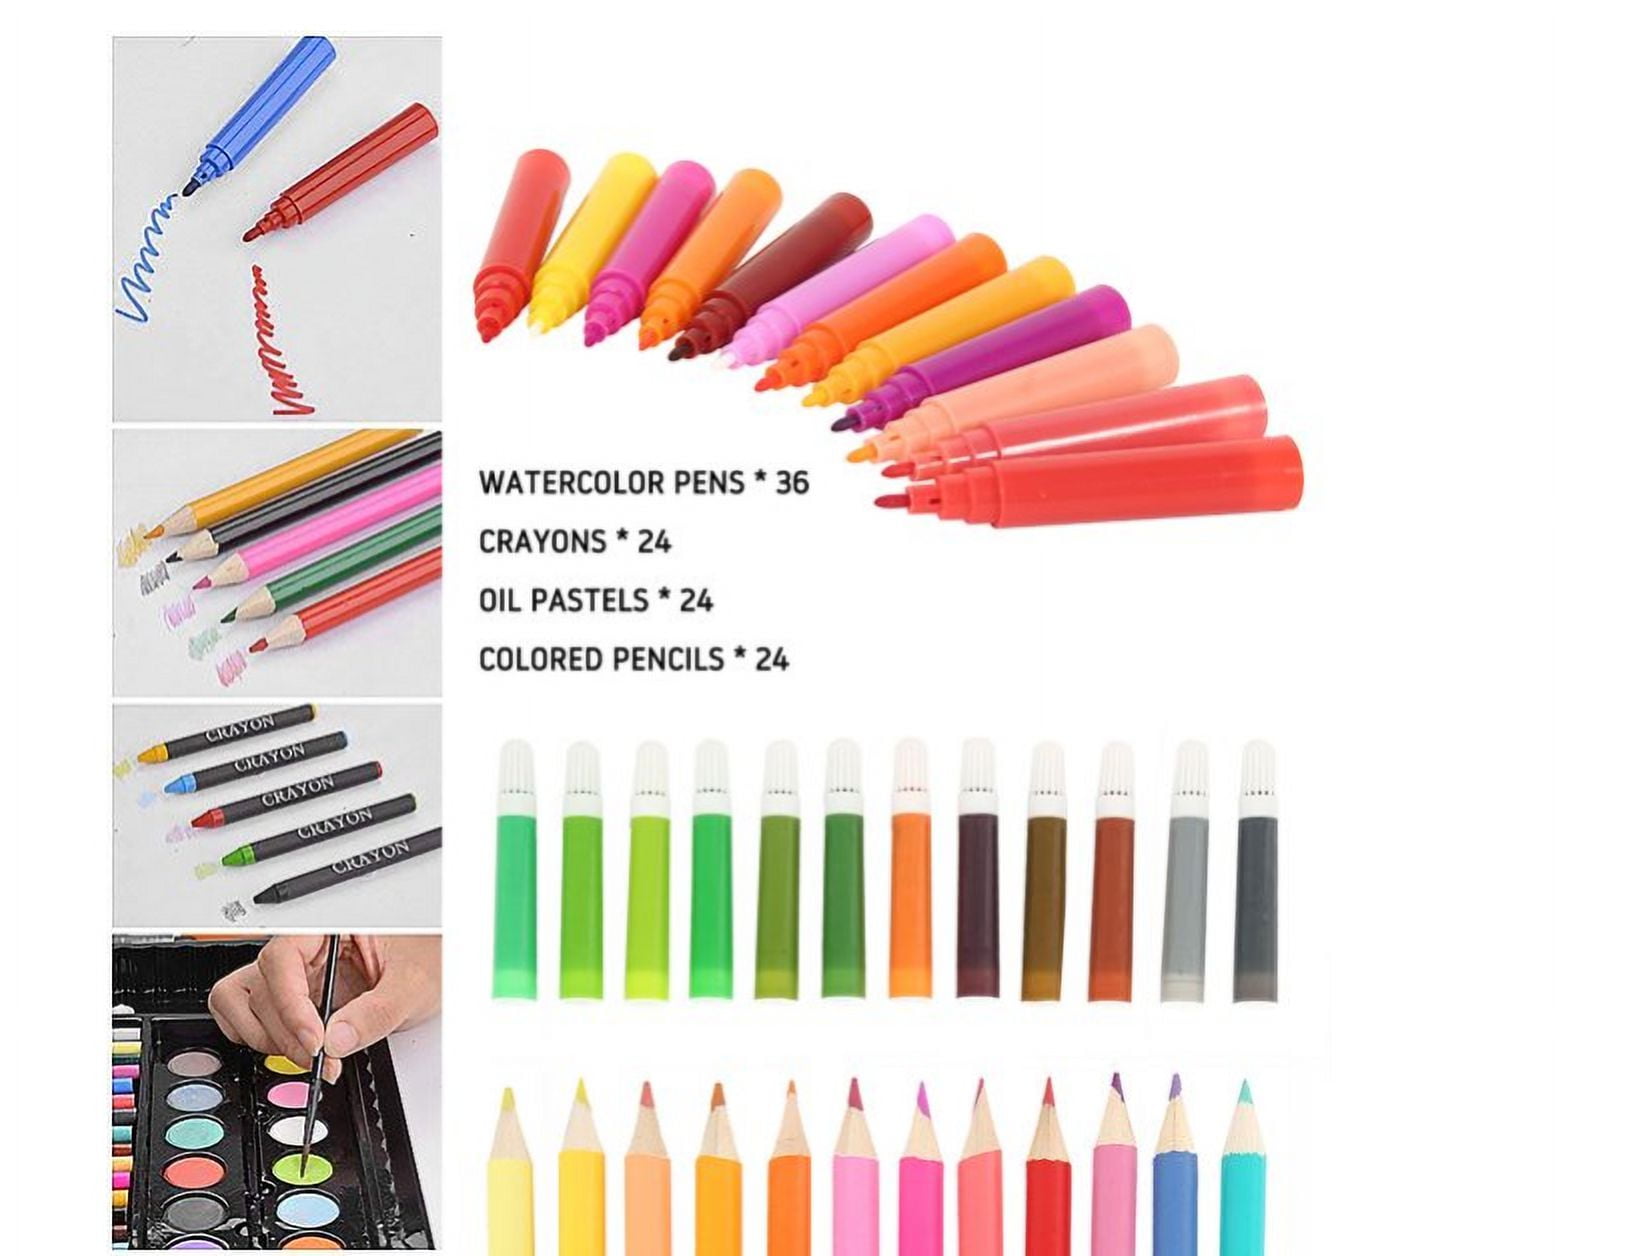 Art Supplies for Kids, Art Set, Art Kit, Drawing Kits, Art and Crafts with  Origami Paper, Scissors, Coloring Book, Crayons, Markers, Kindergarten